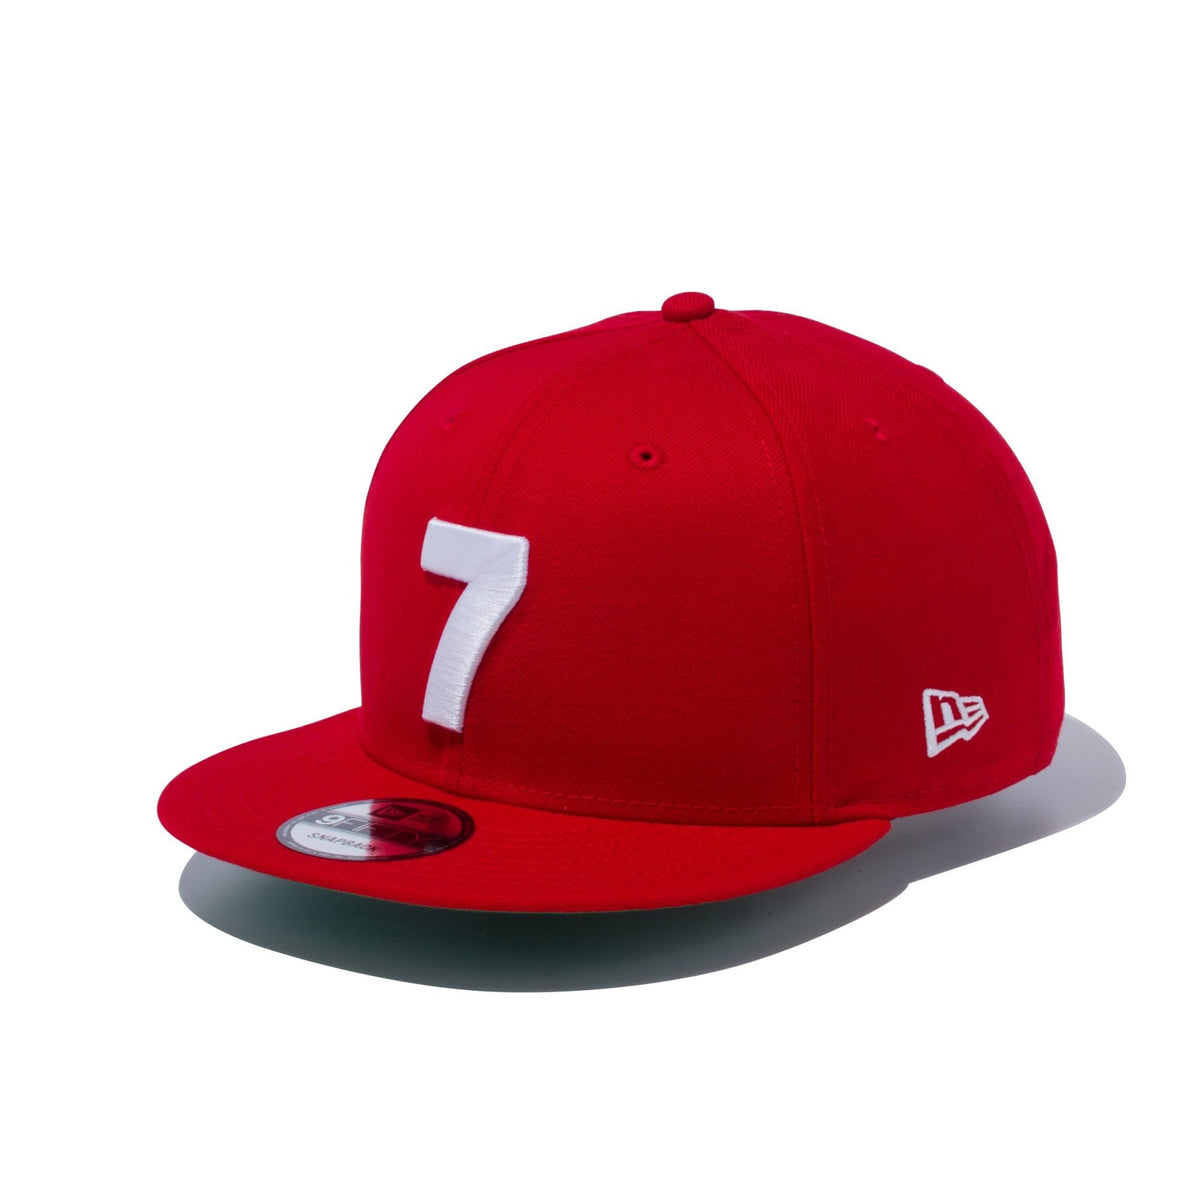 9FIFTY The COMPOUND 7 スカーレット × ホワイト